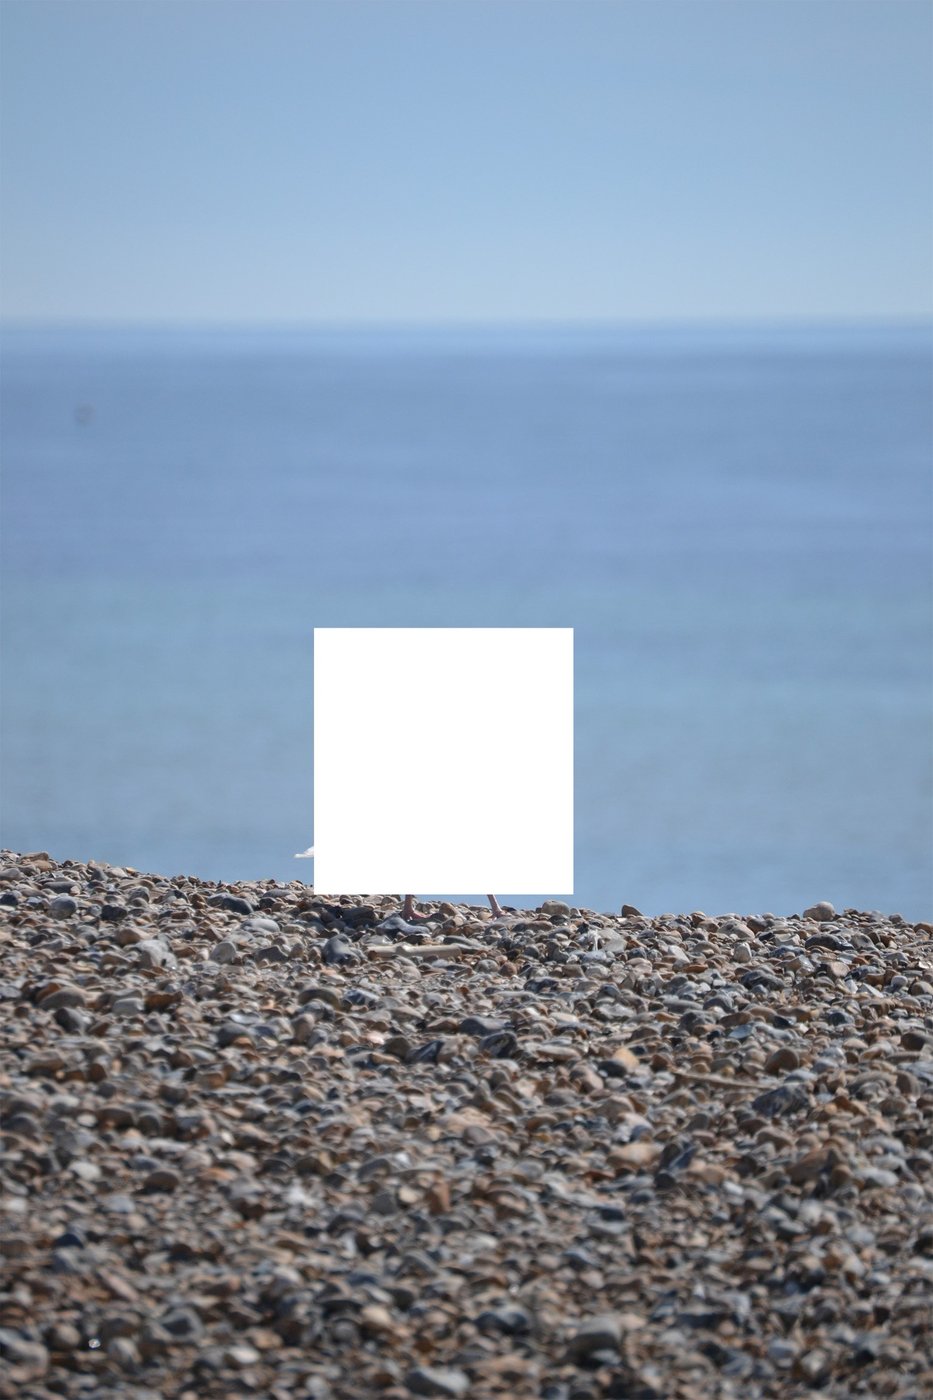 view of the sea. Where one might expect to see a seagull, there is a black area blocking the view.